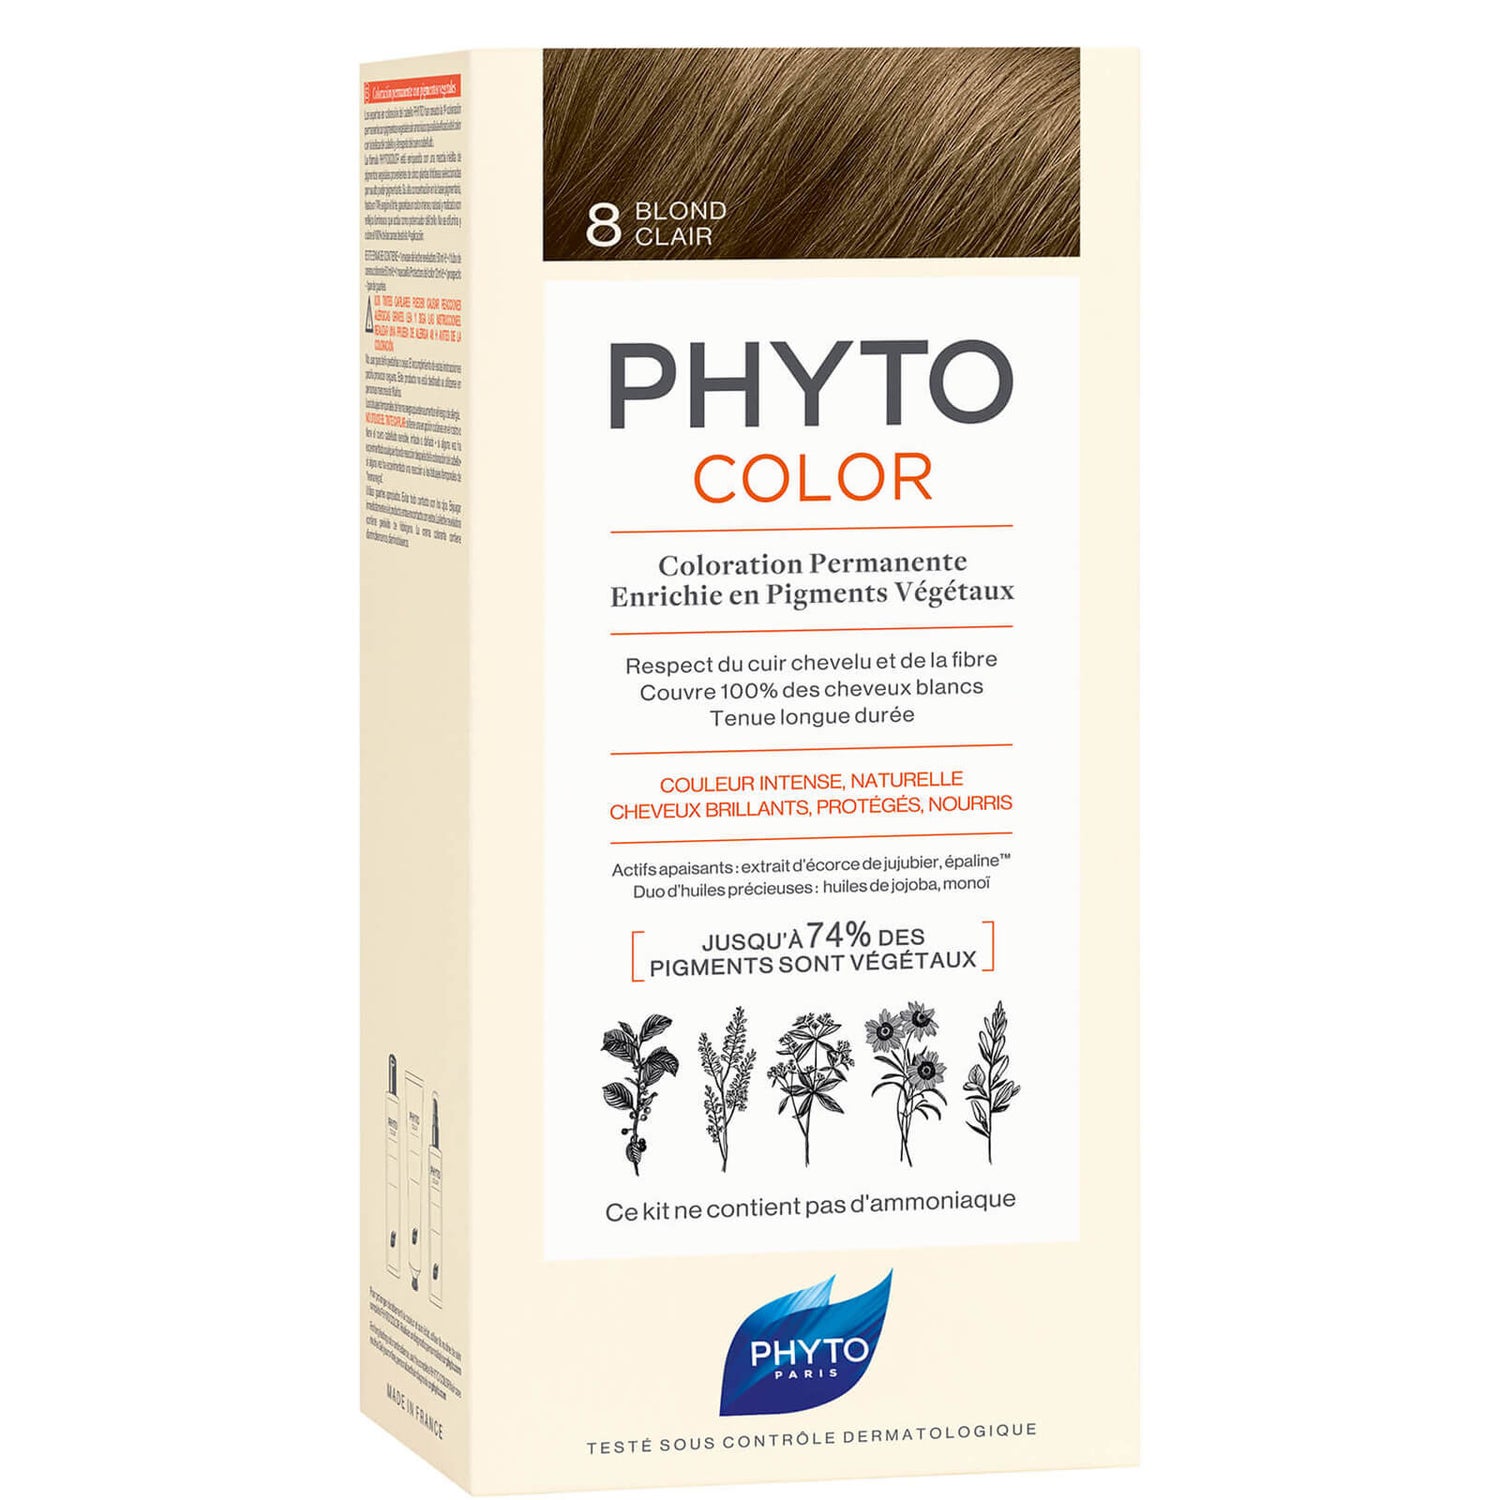 Phyto Hair Colour by Phytocolor - 8 Light Blonde 180g